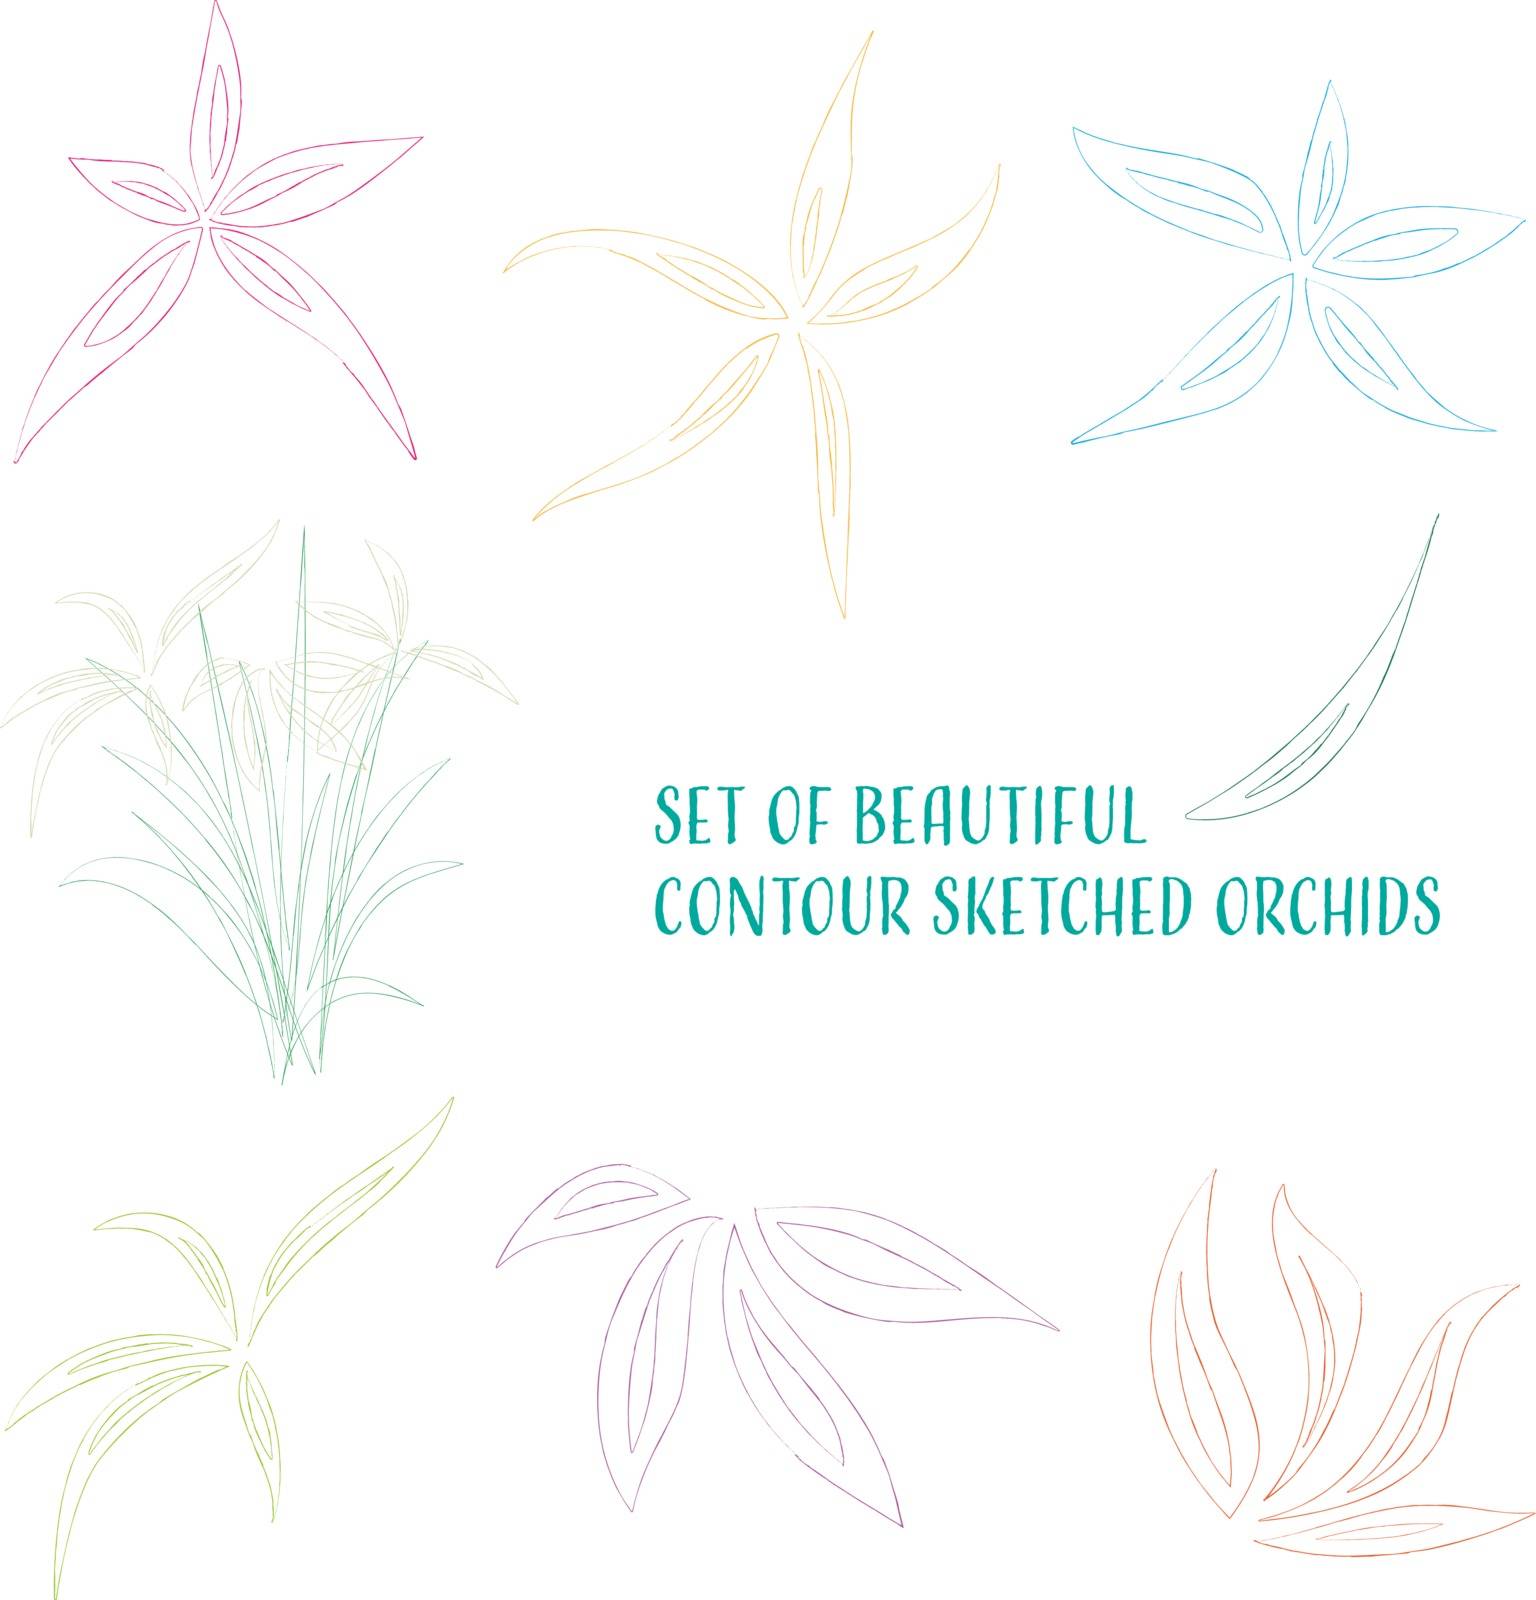 Contour sketched flowers by clusterx